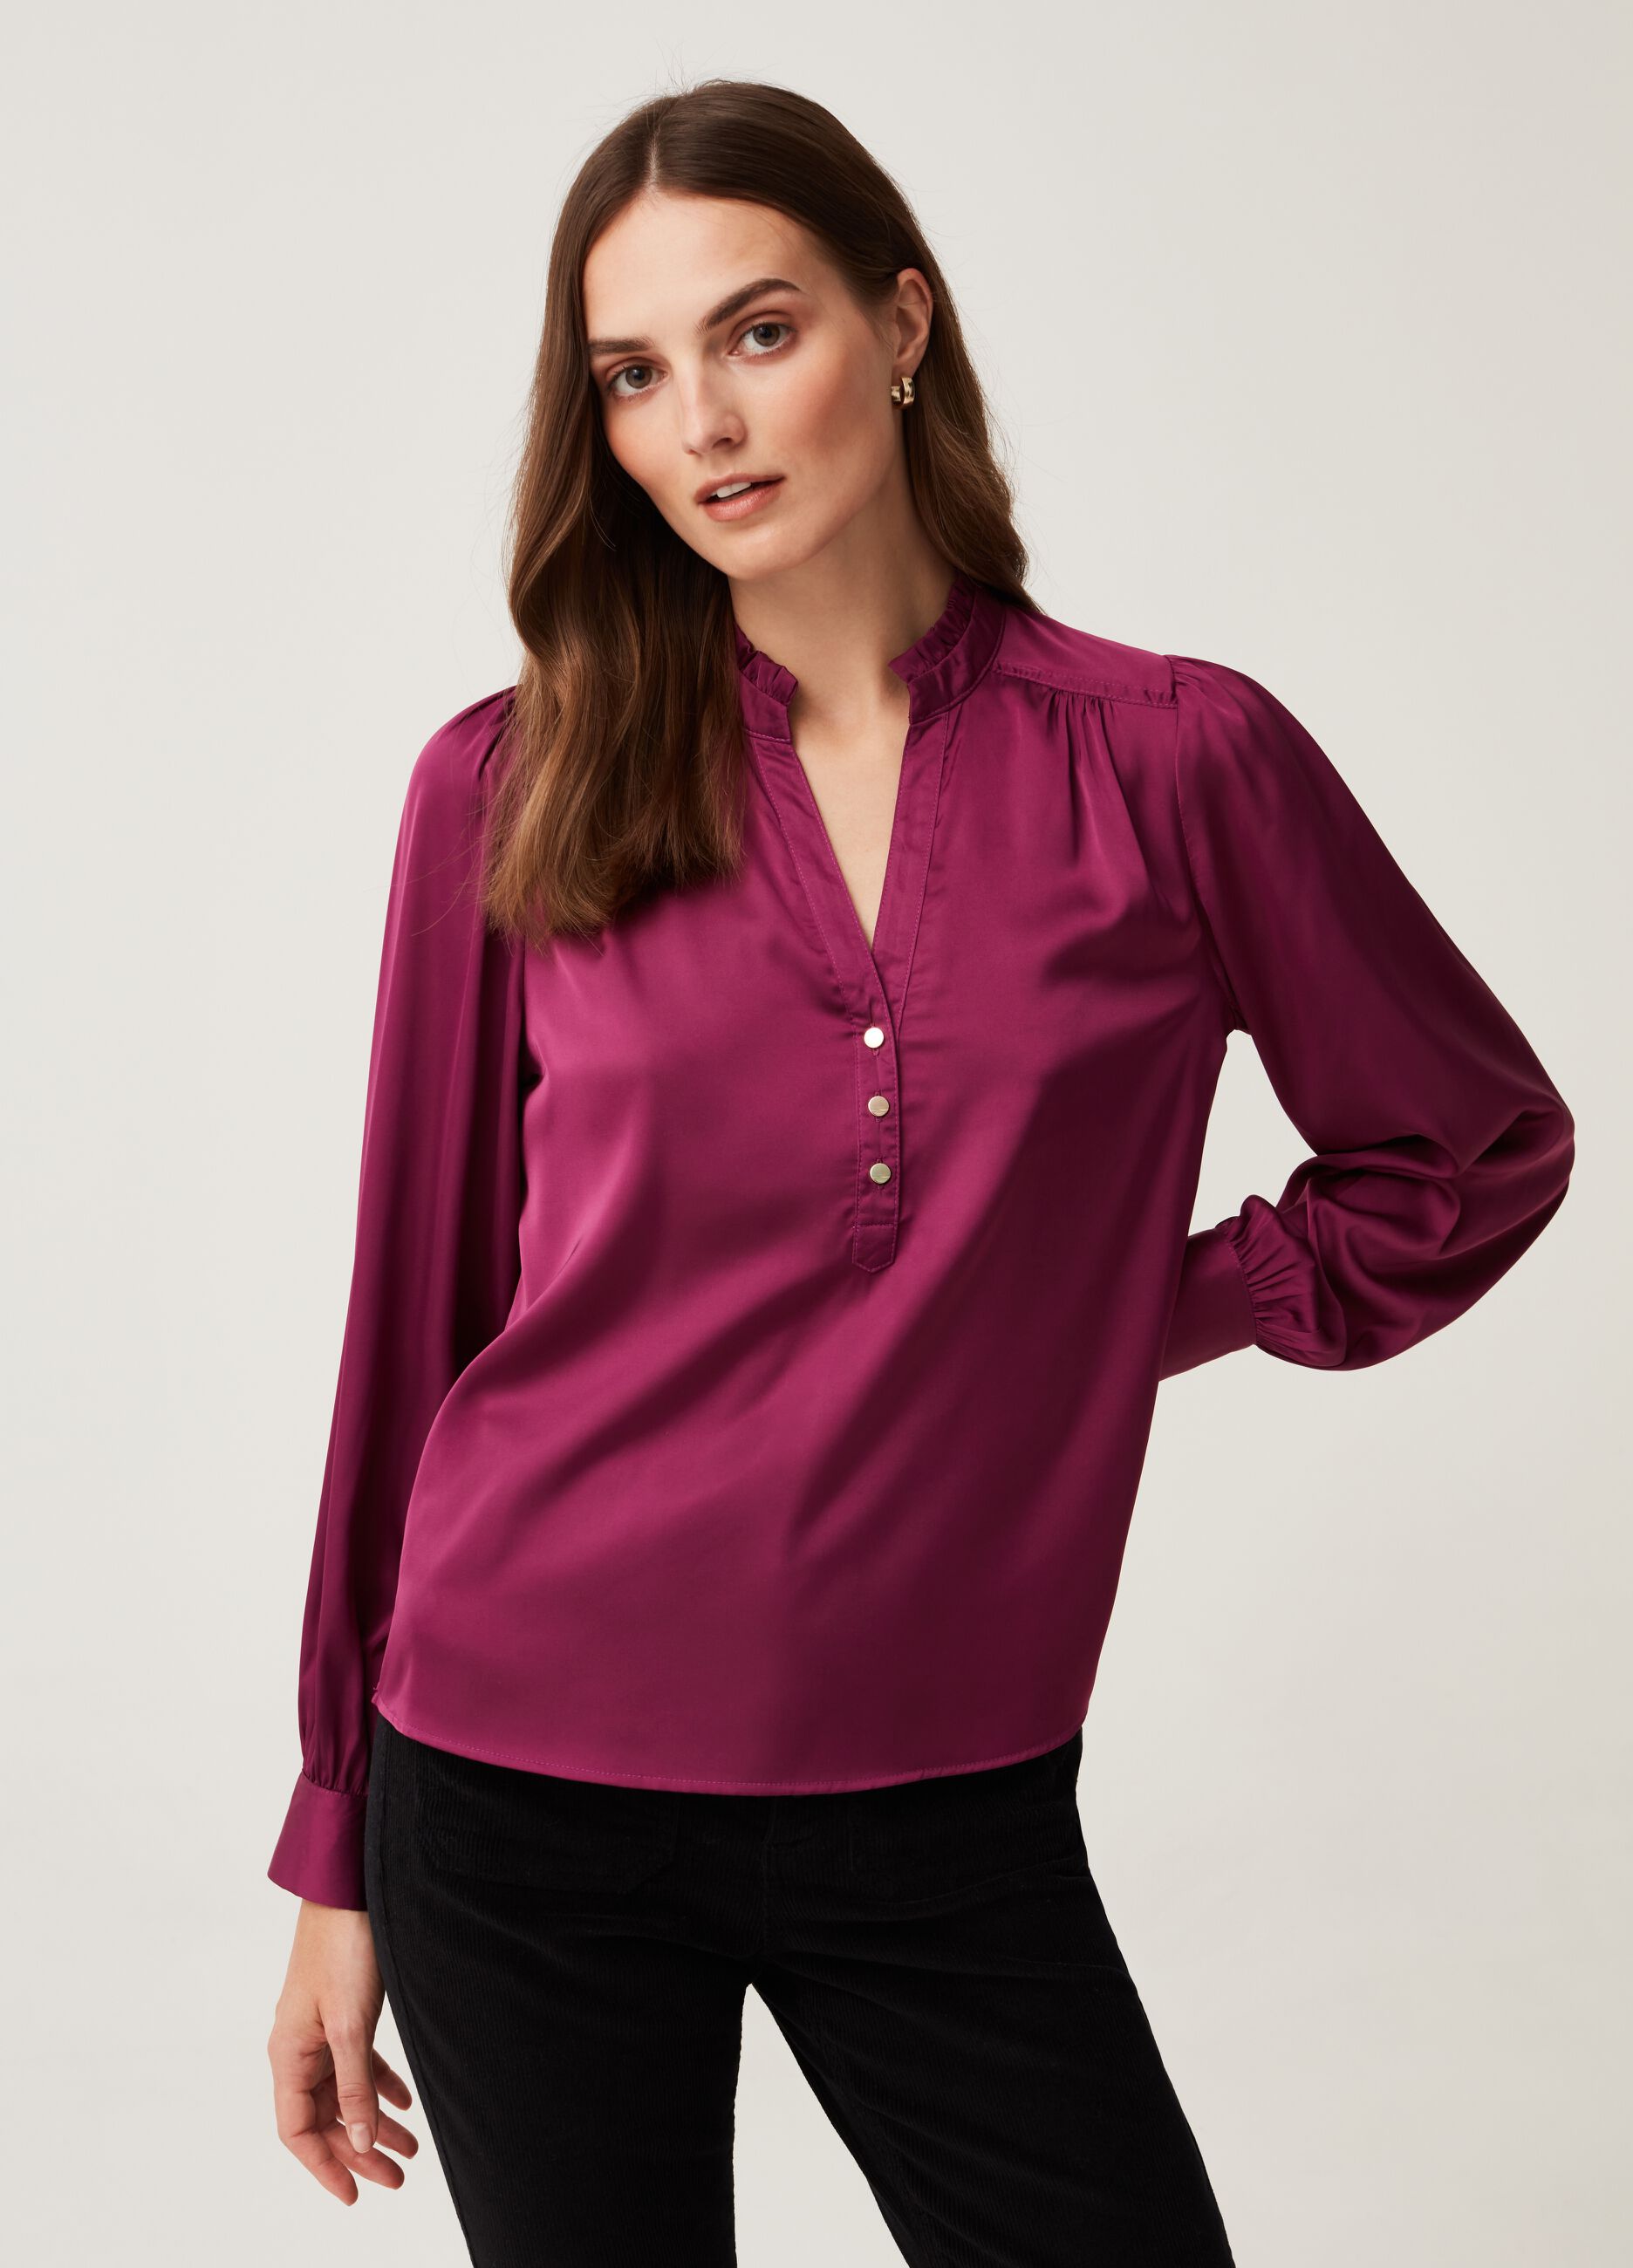 Satin blouse with gold buttons